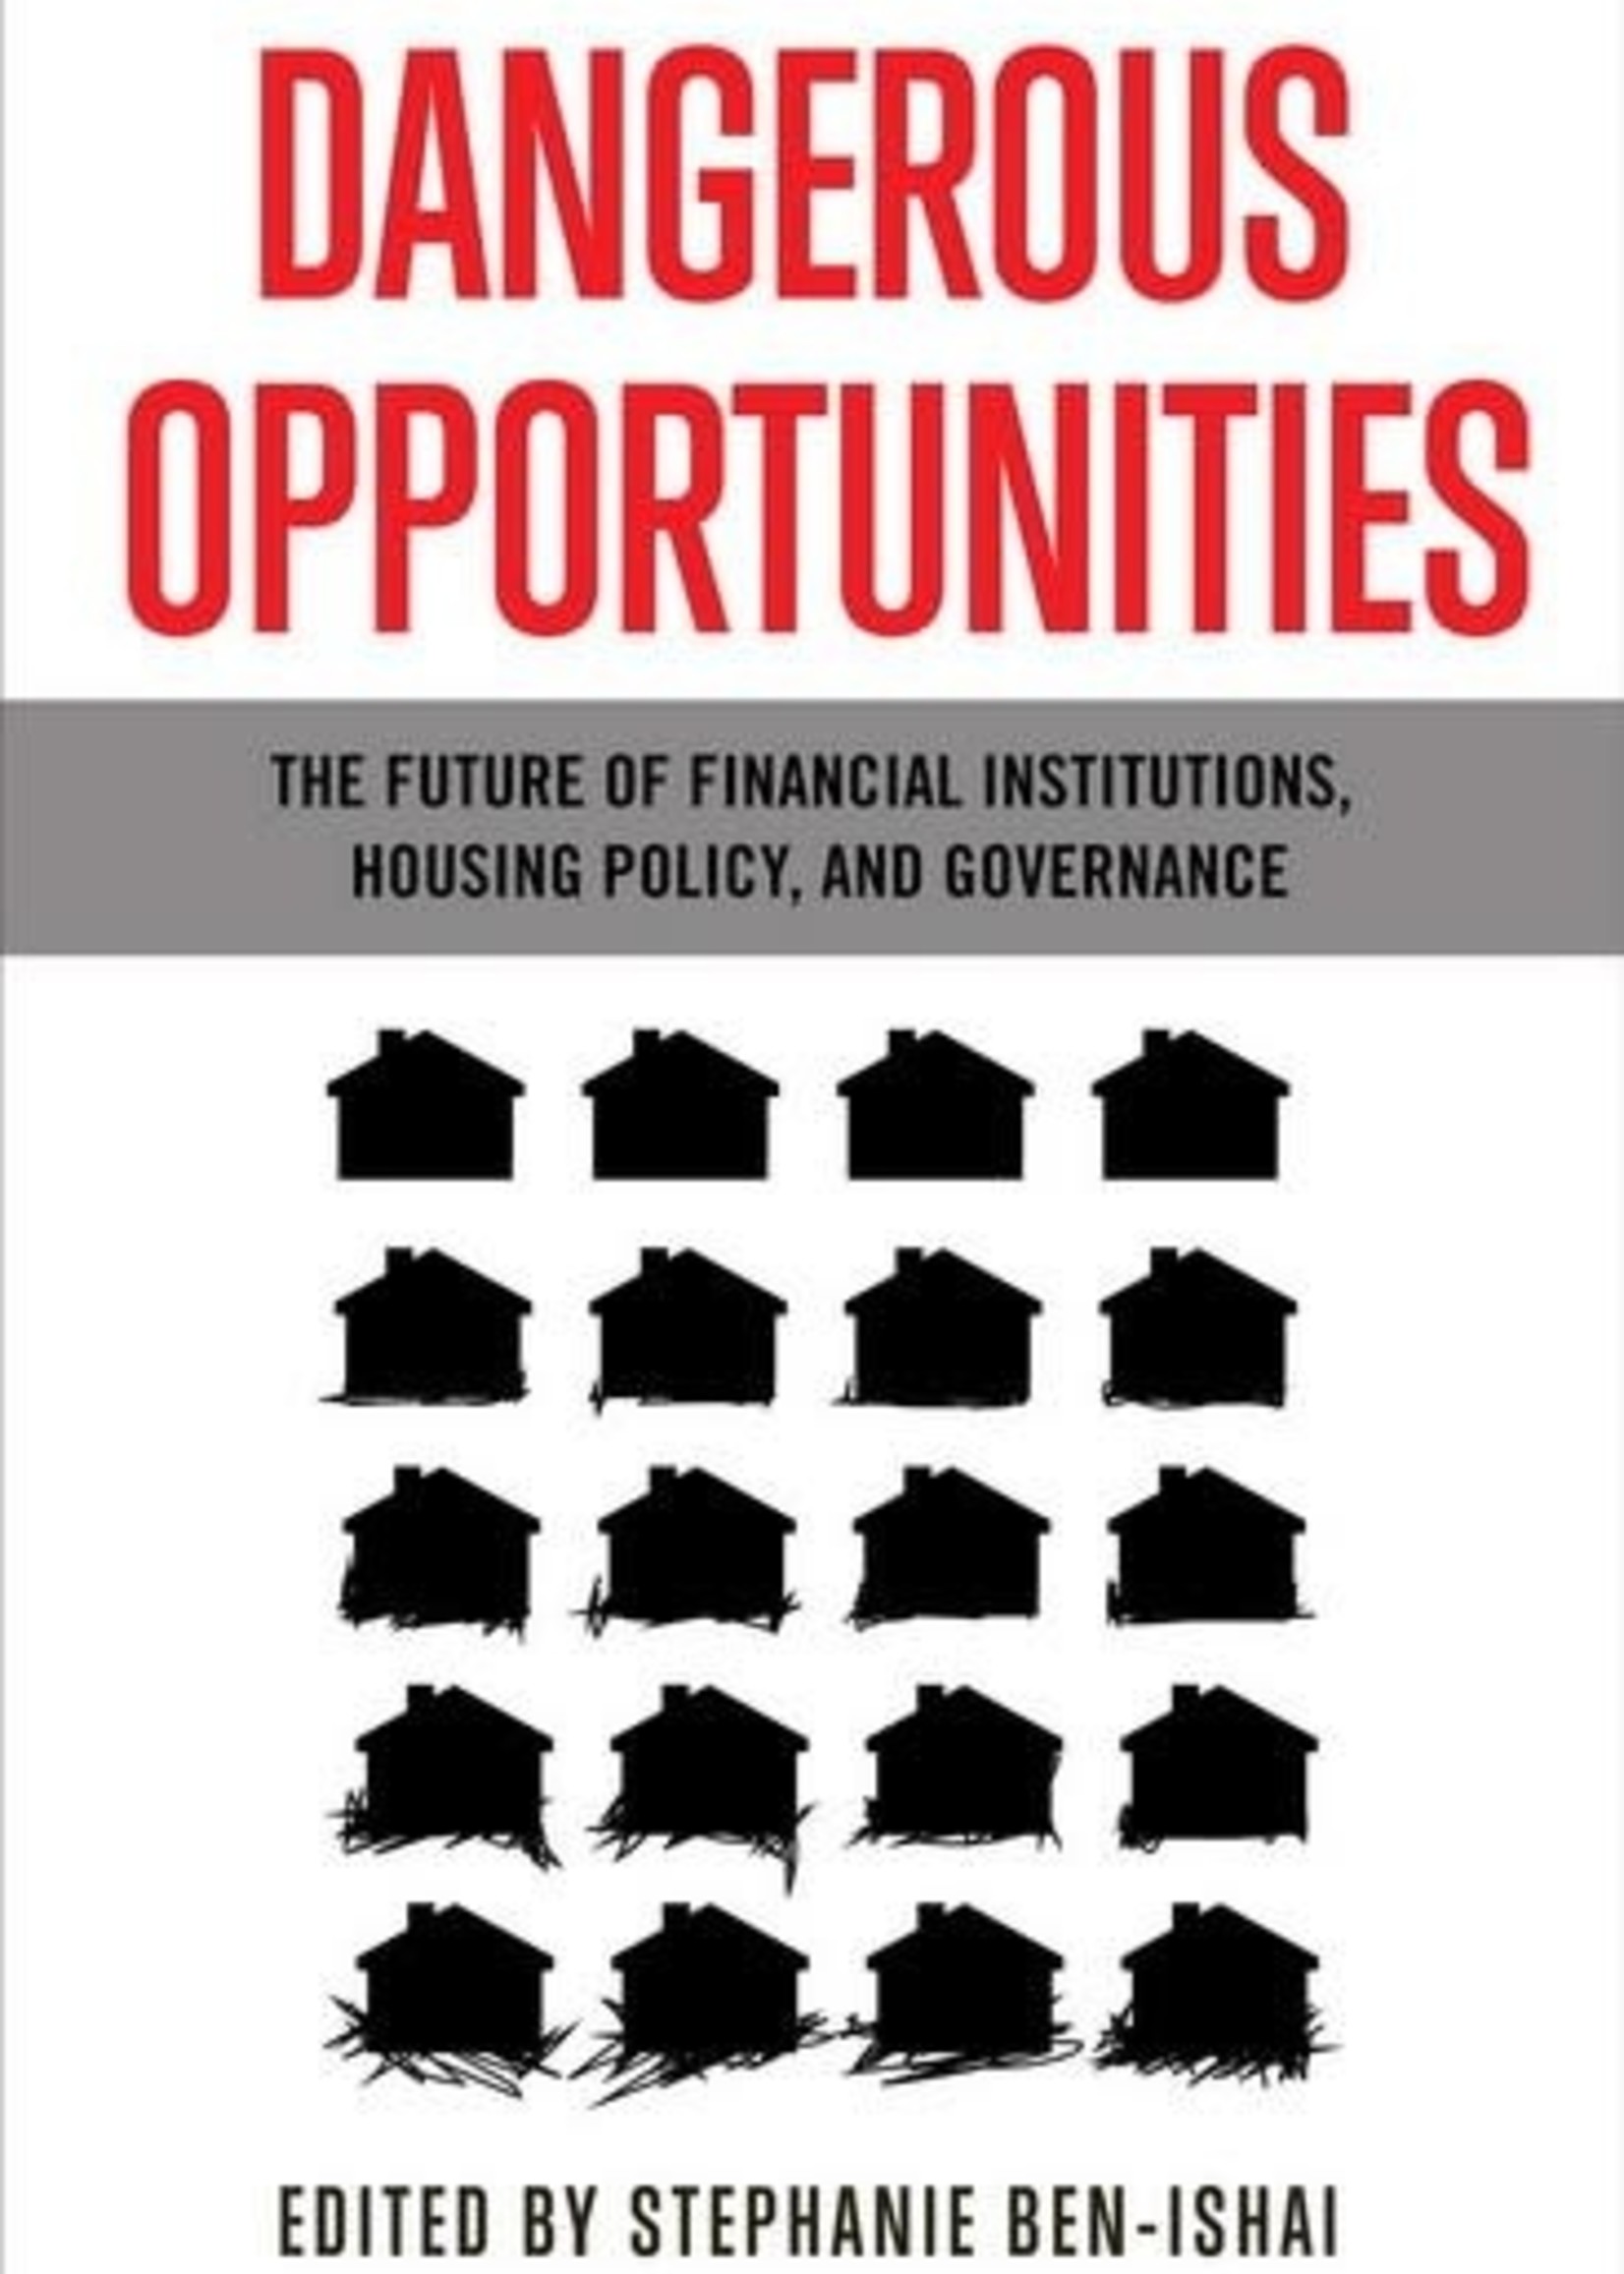 Dangerous Opportunities: The Future of Financial Institutions, Housing Policy, and Governance by Stephanie Ben-ishai